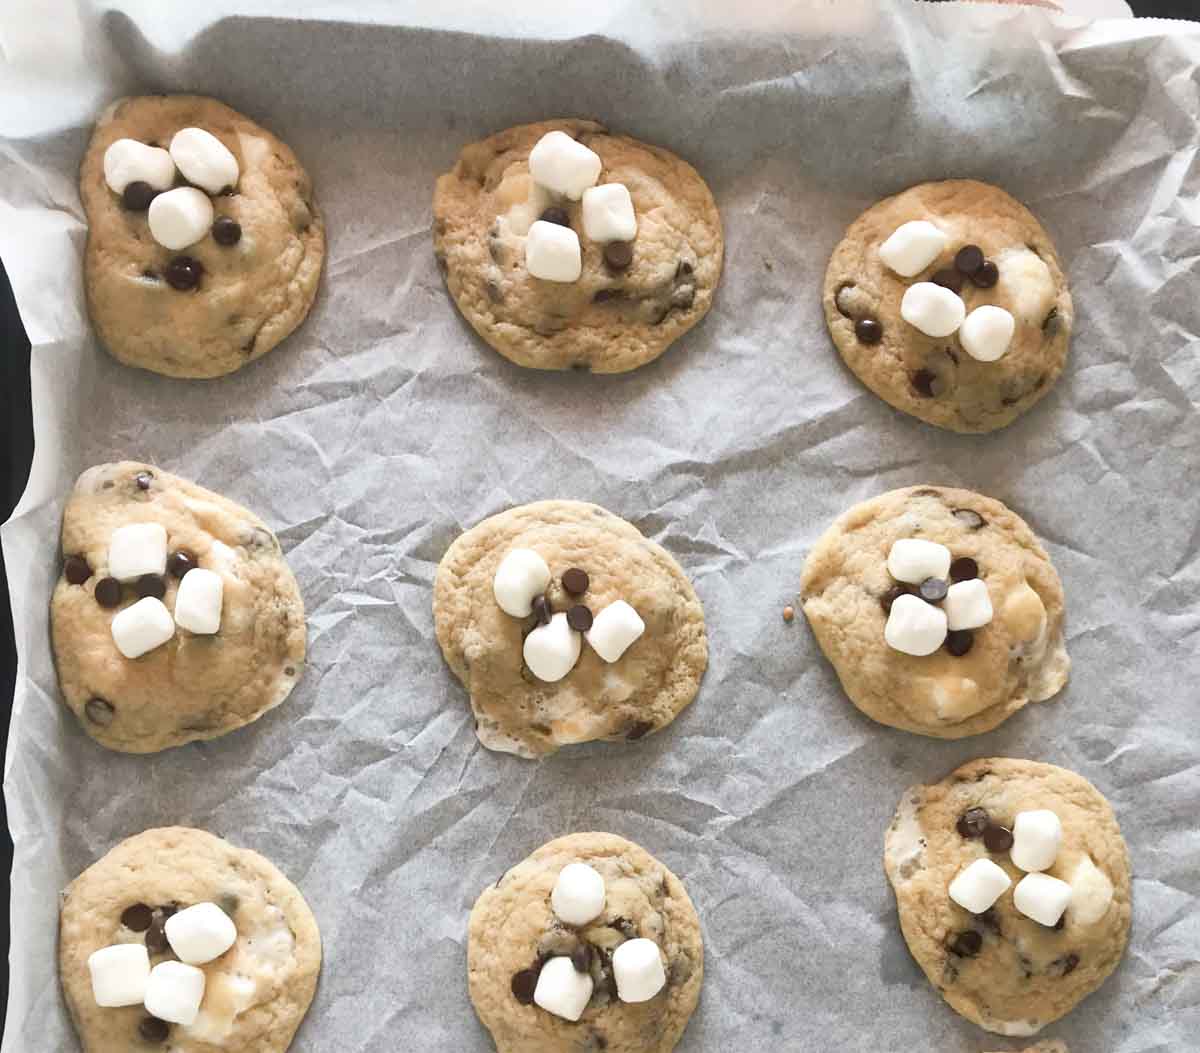 Adding mini marshmallows and chocolate chips on cookies.